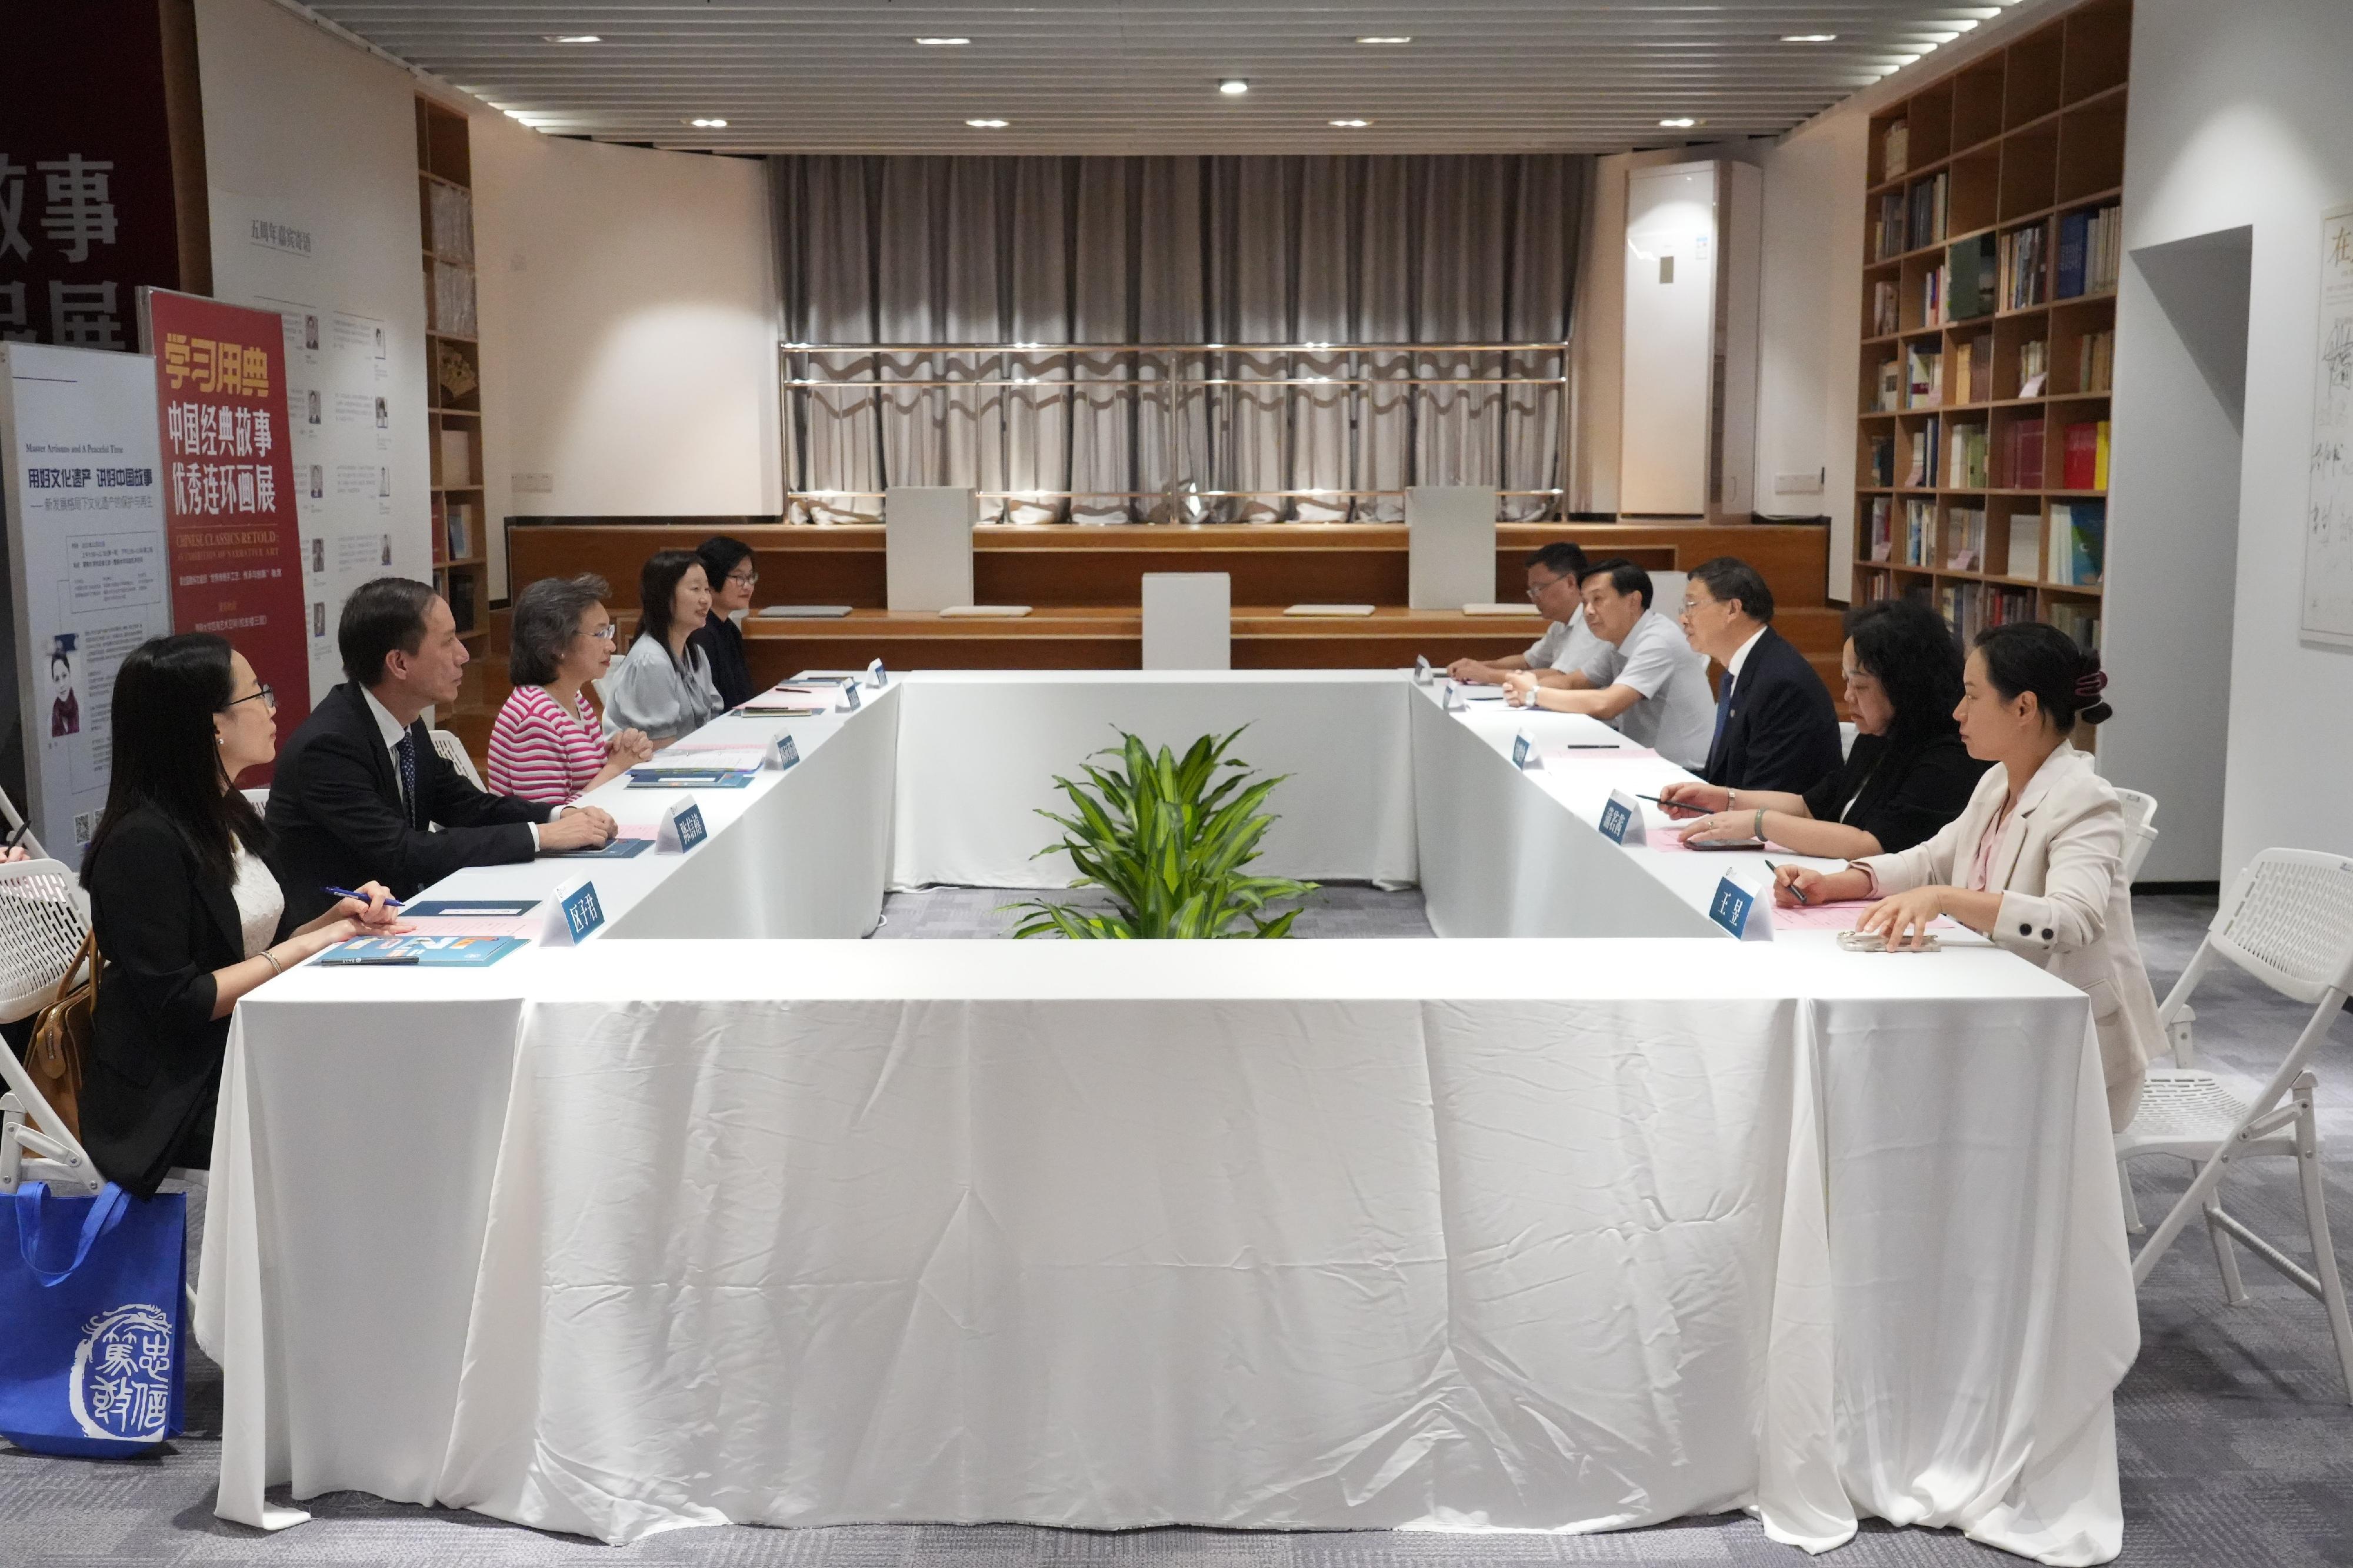 The Secretary for the Civil Service, Mrs Ingrid Yeung (third left), met and exchanged views with the President of Jinan University, Professor Song Xianzhong (third right), and university staff today (September 6) to know more about the university's development as well as the learning and employment situation of Hong Kong students.